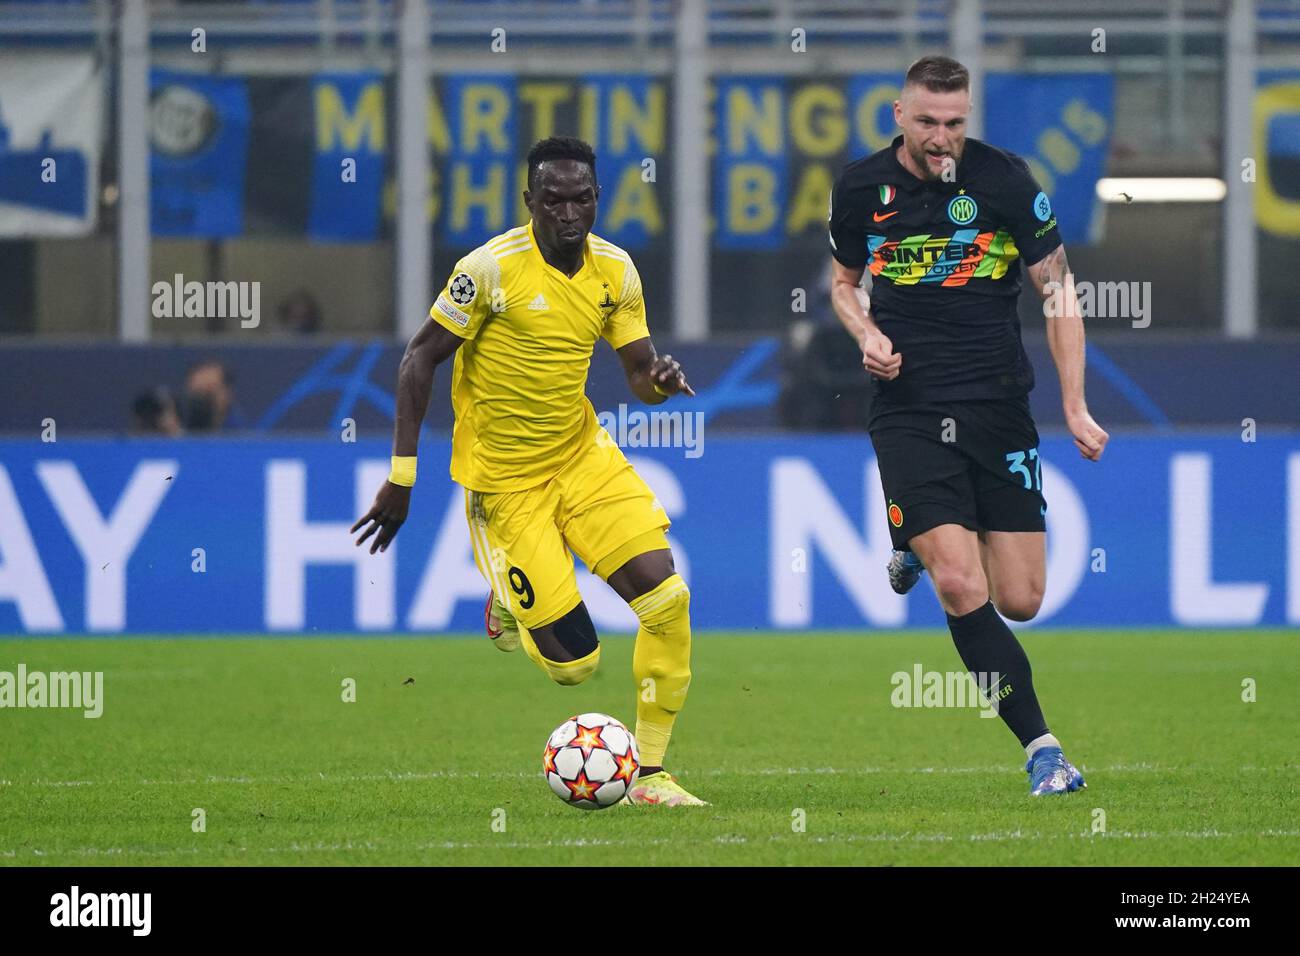 Milan, Italy. 19th Oct, 2021. Milan Skriniar (FC Inter) and Adama Traore (FC Sheriff Tiraspol) during Inter - FC Internazionale vs Sheriff Tiraspol, UEFA Champions League football match in Milan, Italy, October 19 2021 Credit: Independent Photo Agency/Alamy Live News Stock Photo